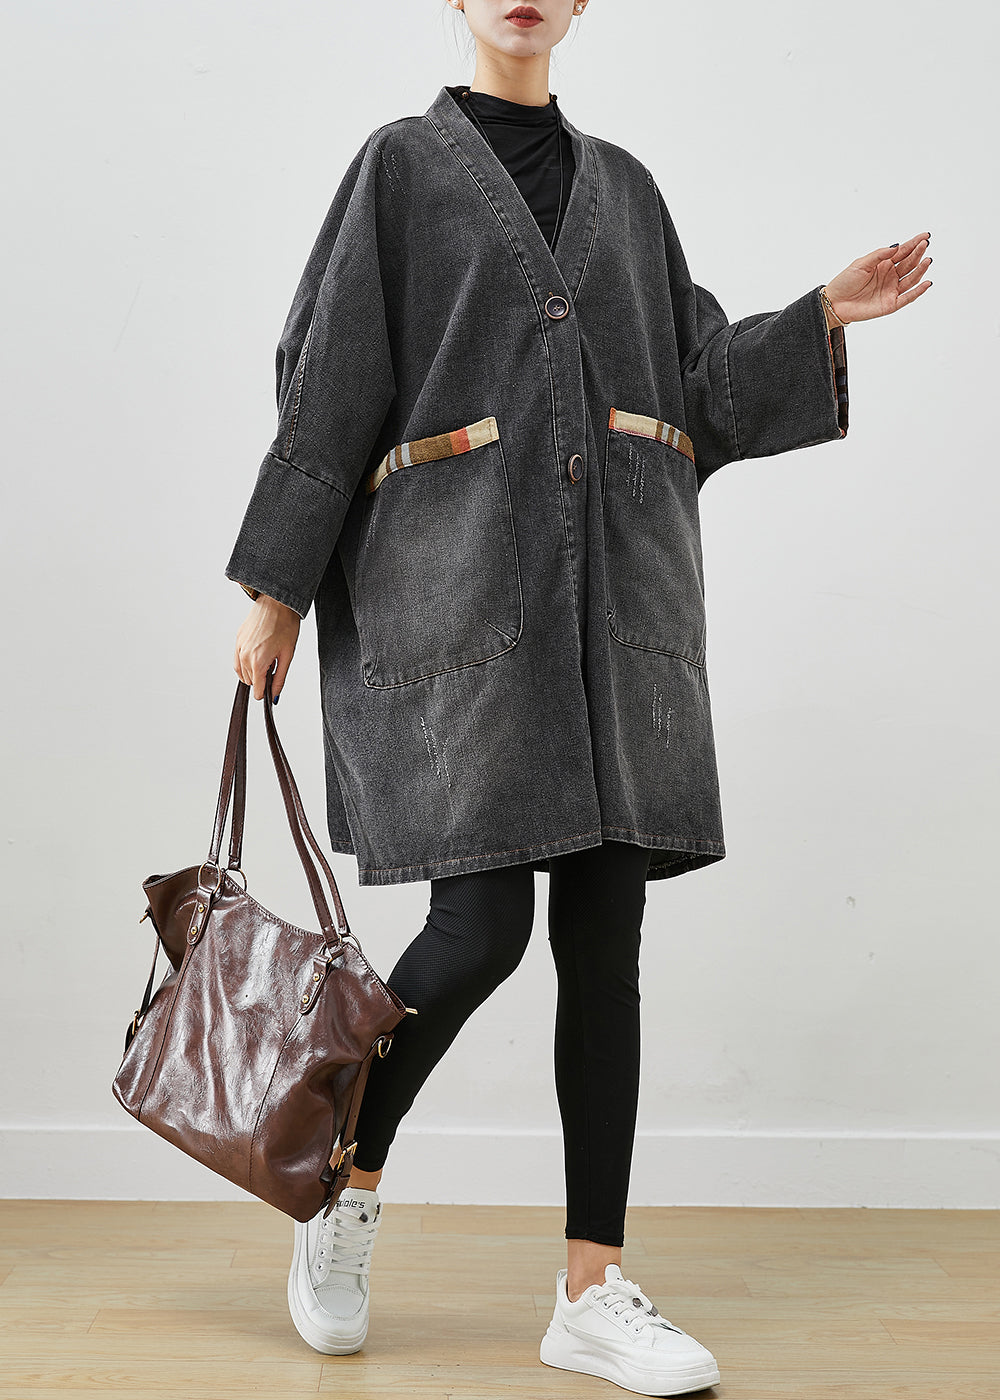 Black Patchwork Denim Trench Coat Outwear Oversized Fall